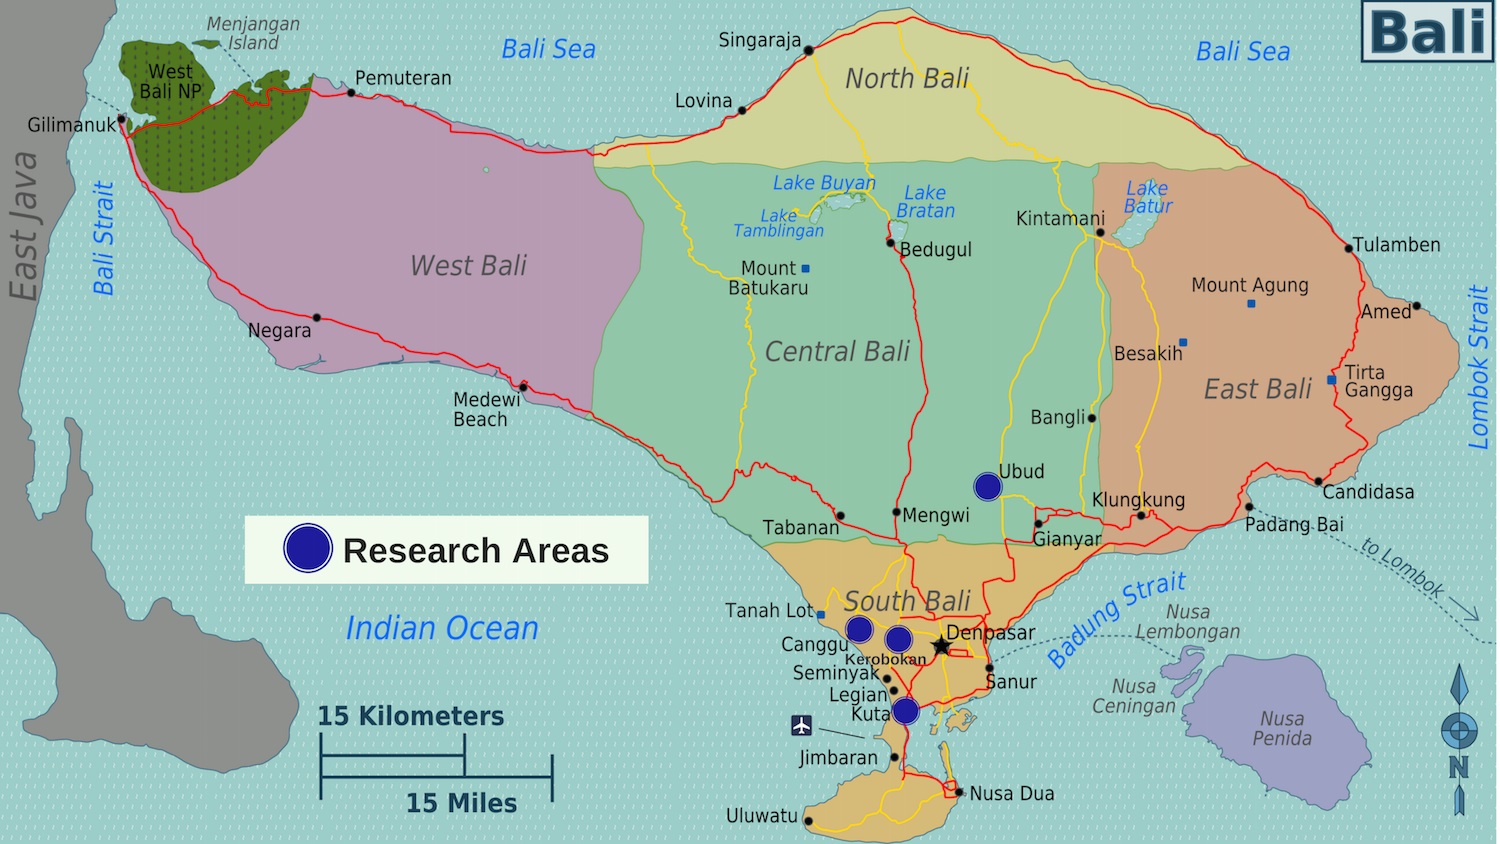 map_of_bali_and_research_areas_authors_burmesedays_peter_fitzgerald_marco_adda_cc_by-sa_4_0-3_0-2_5-2_0-1_0.jpg